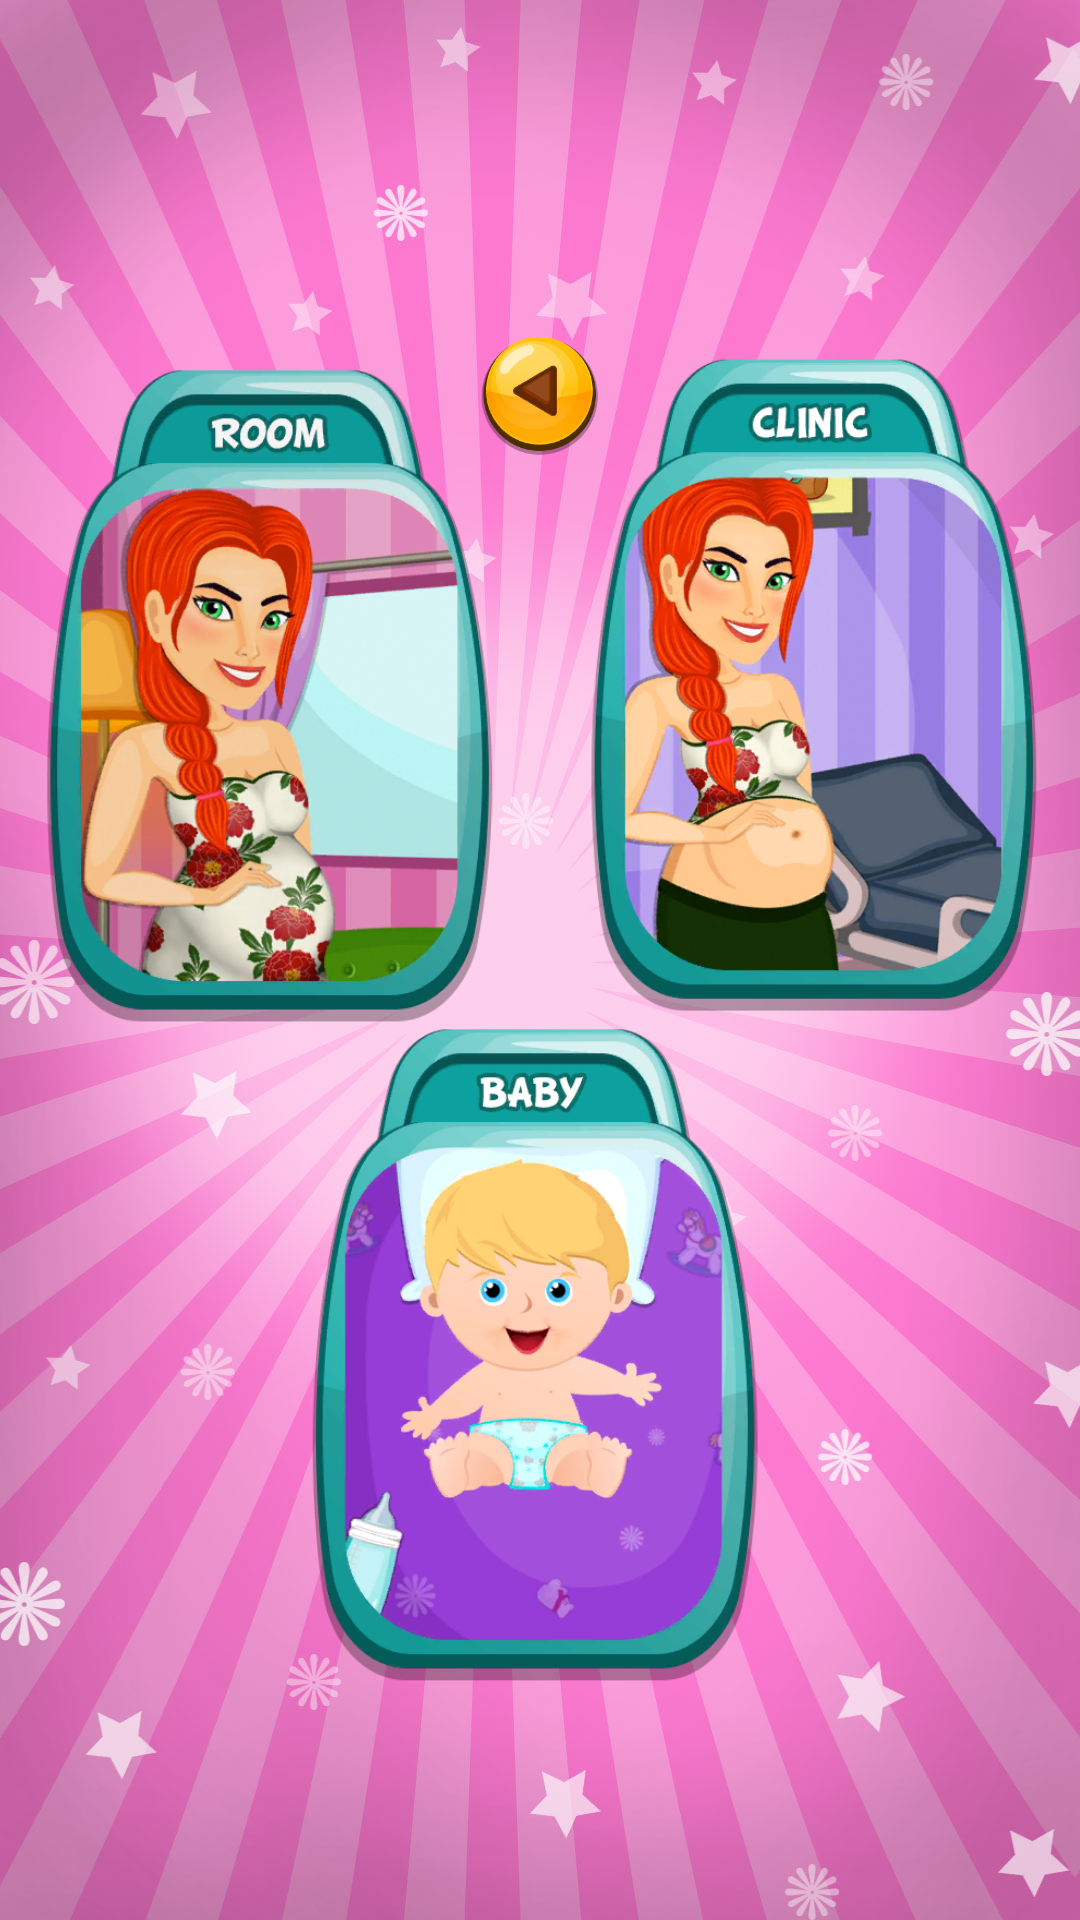 Free My New Baby Born and baby care games APK Download For Android